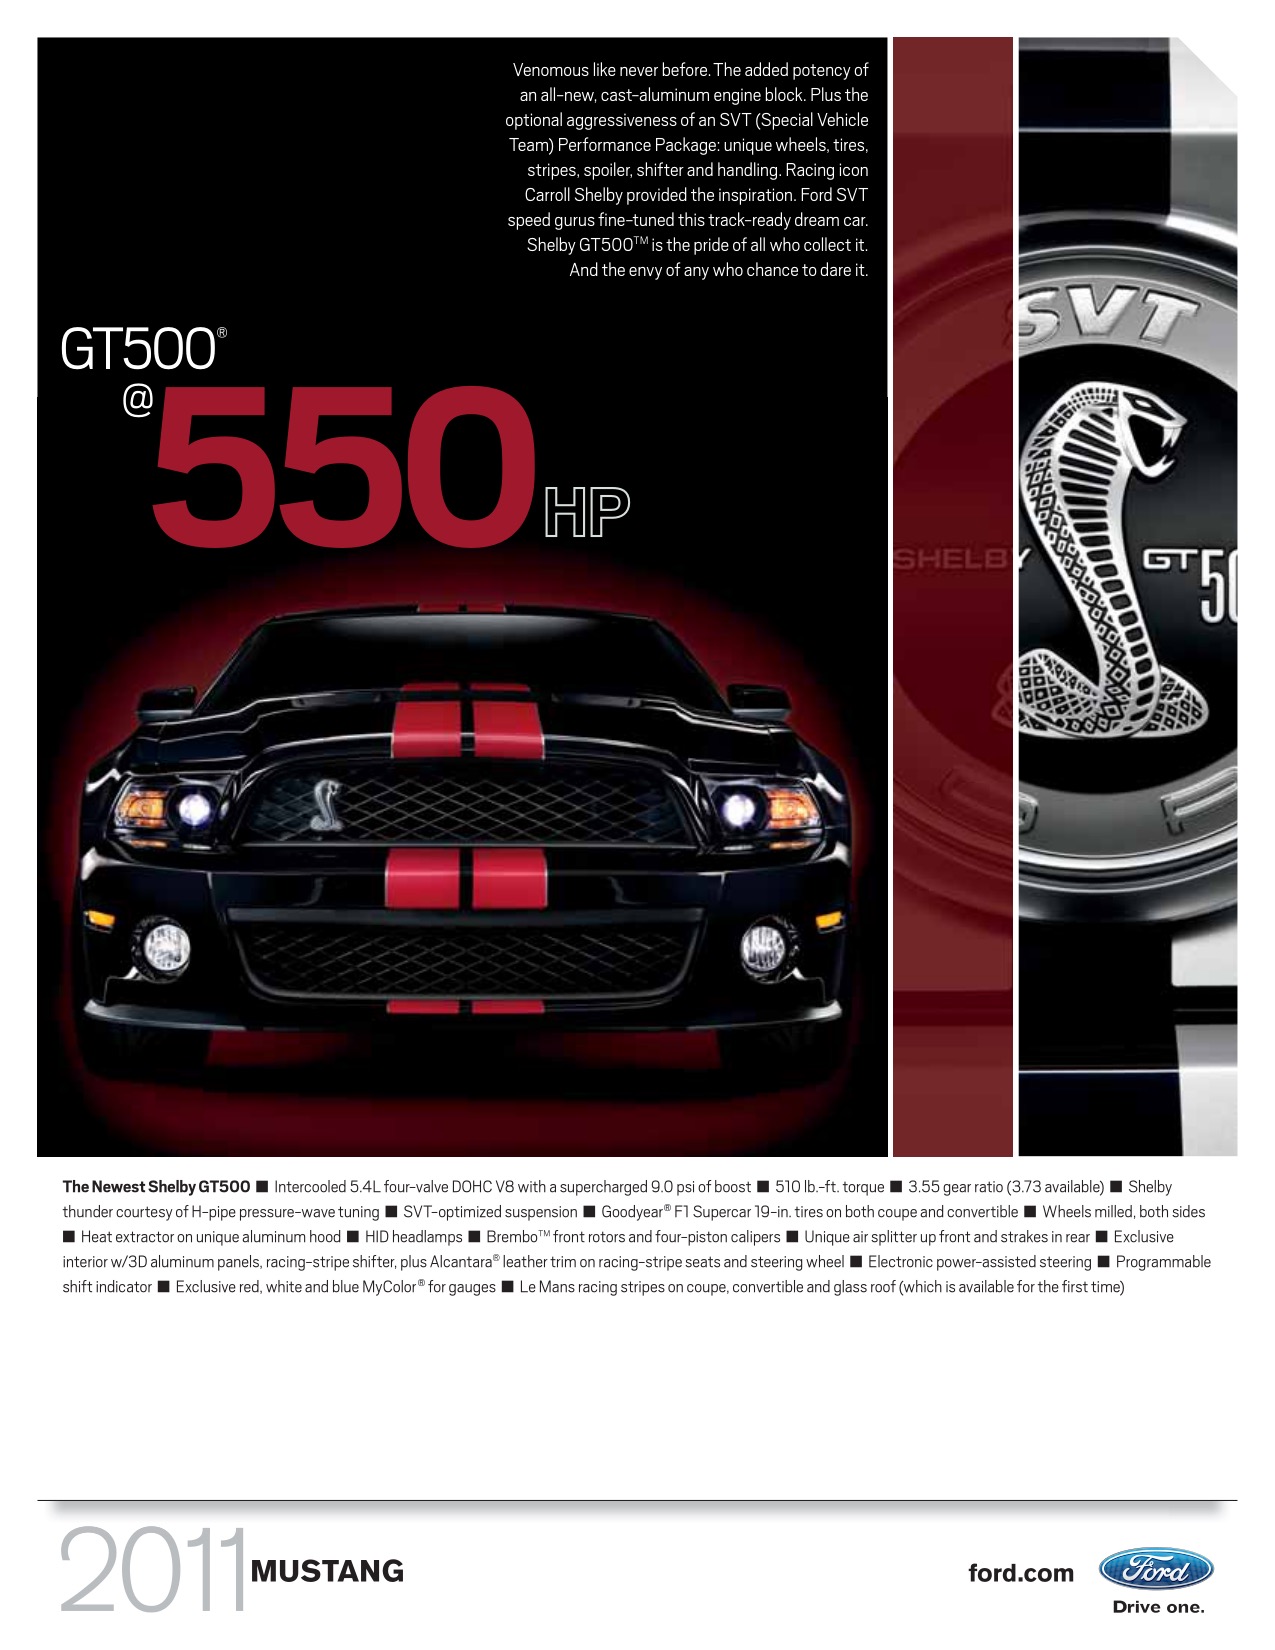 2011 Ford Mustang Brochure Page 2